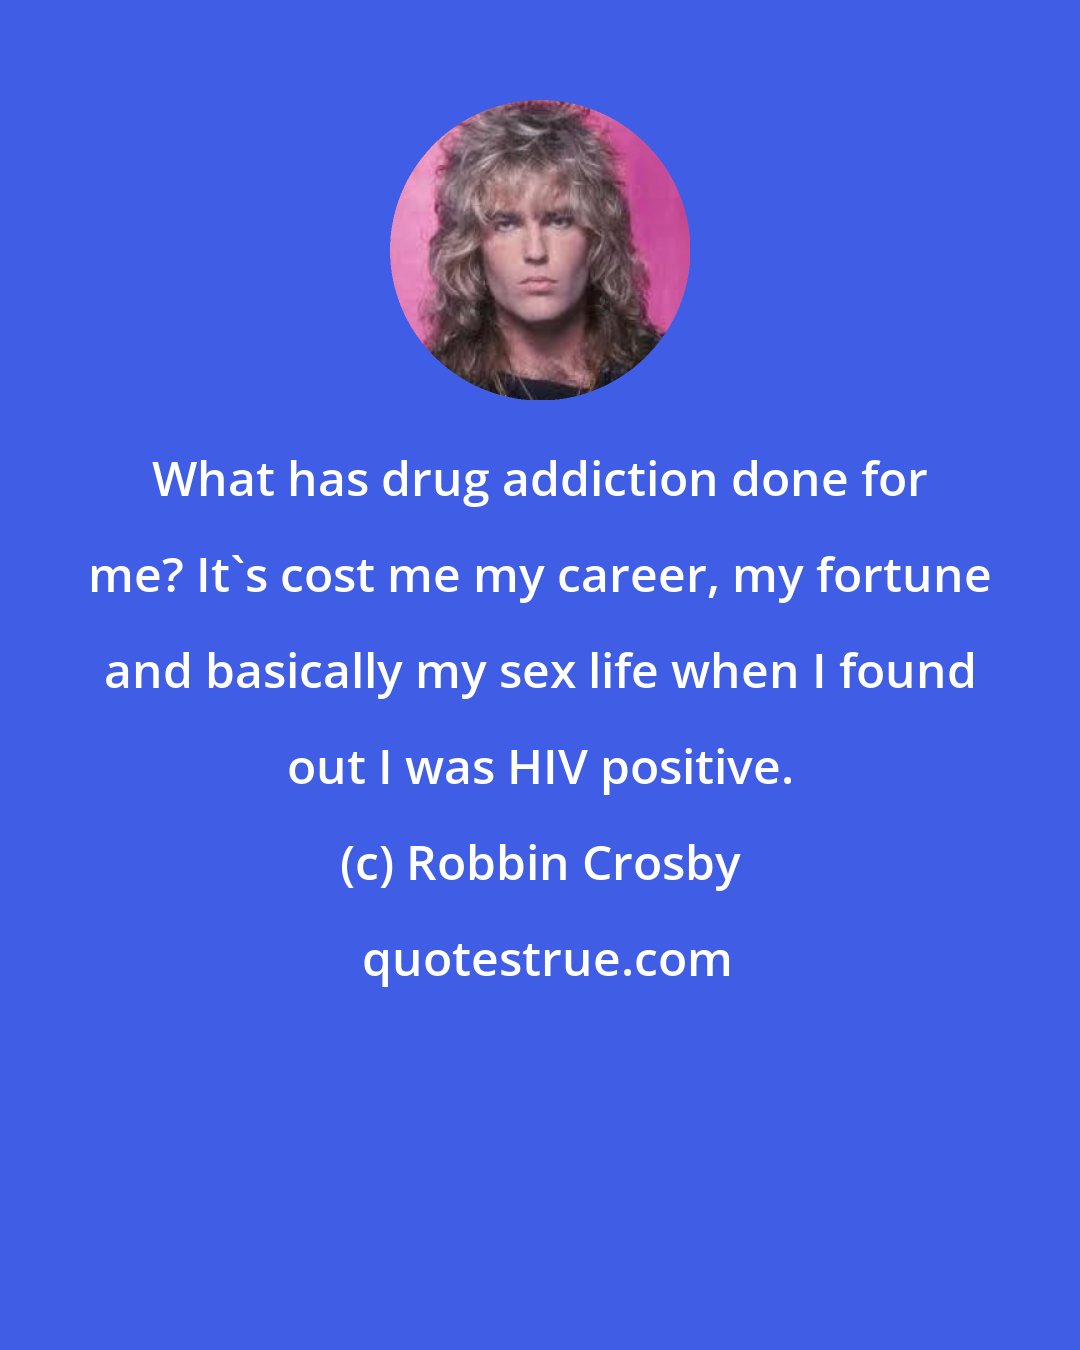 Robbin Crosby: What has drug addiction done for me? It's cost me my career, my fortune and basically my sex life when I found out I was HIV positive.